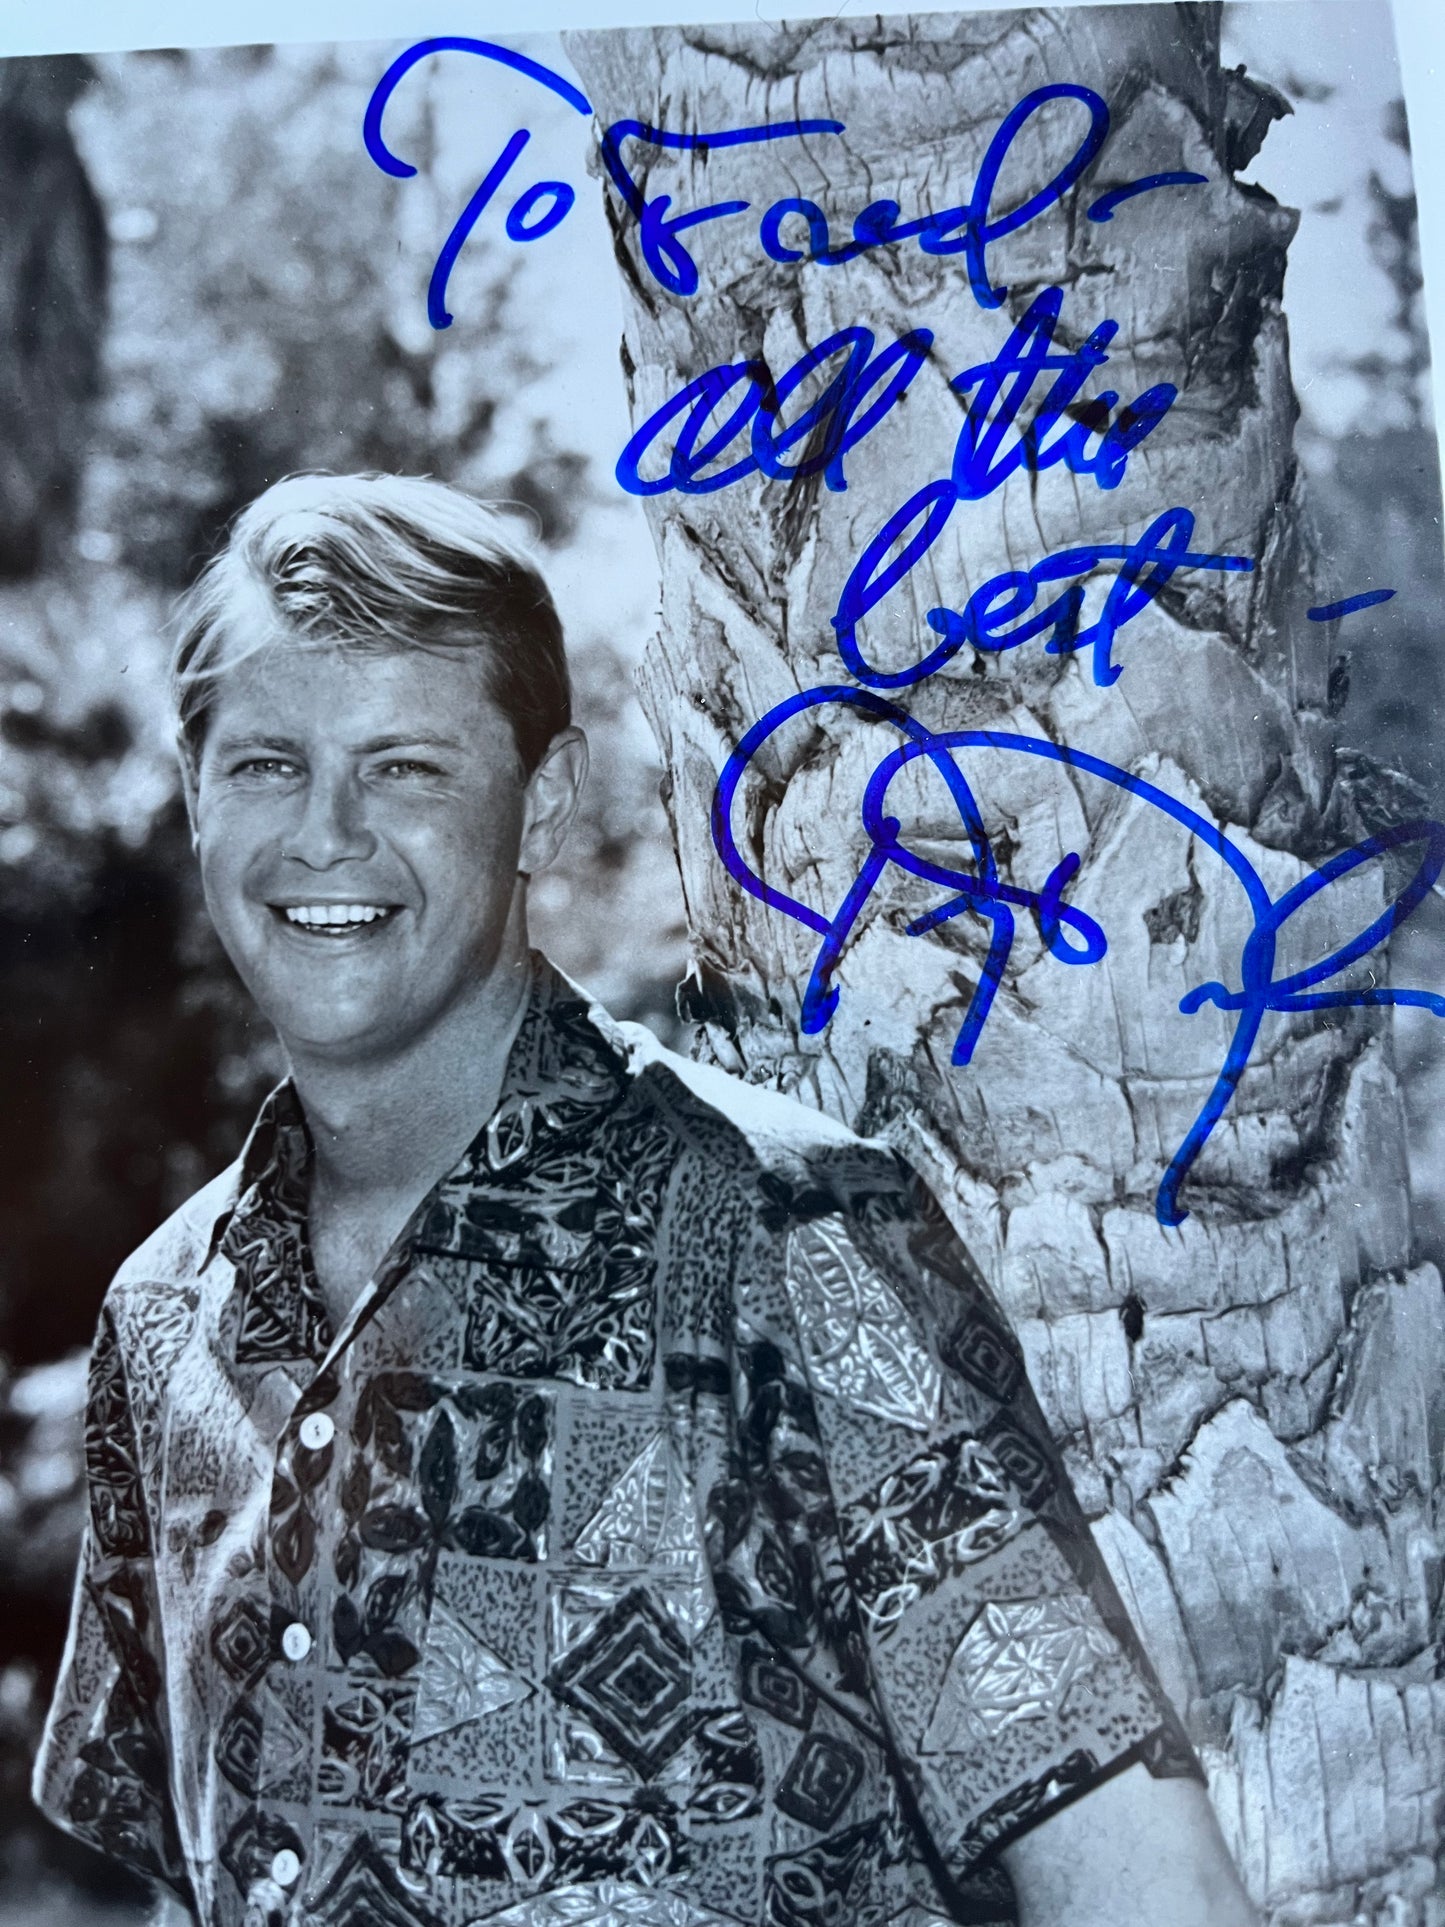 TROY DONAHUE, actor, autograph